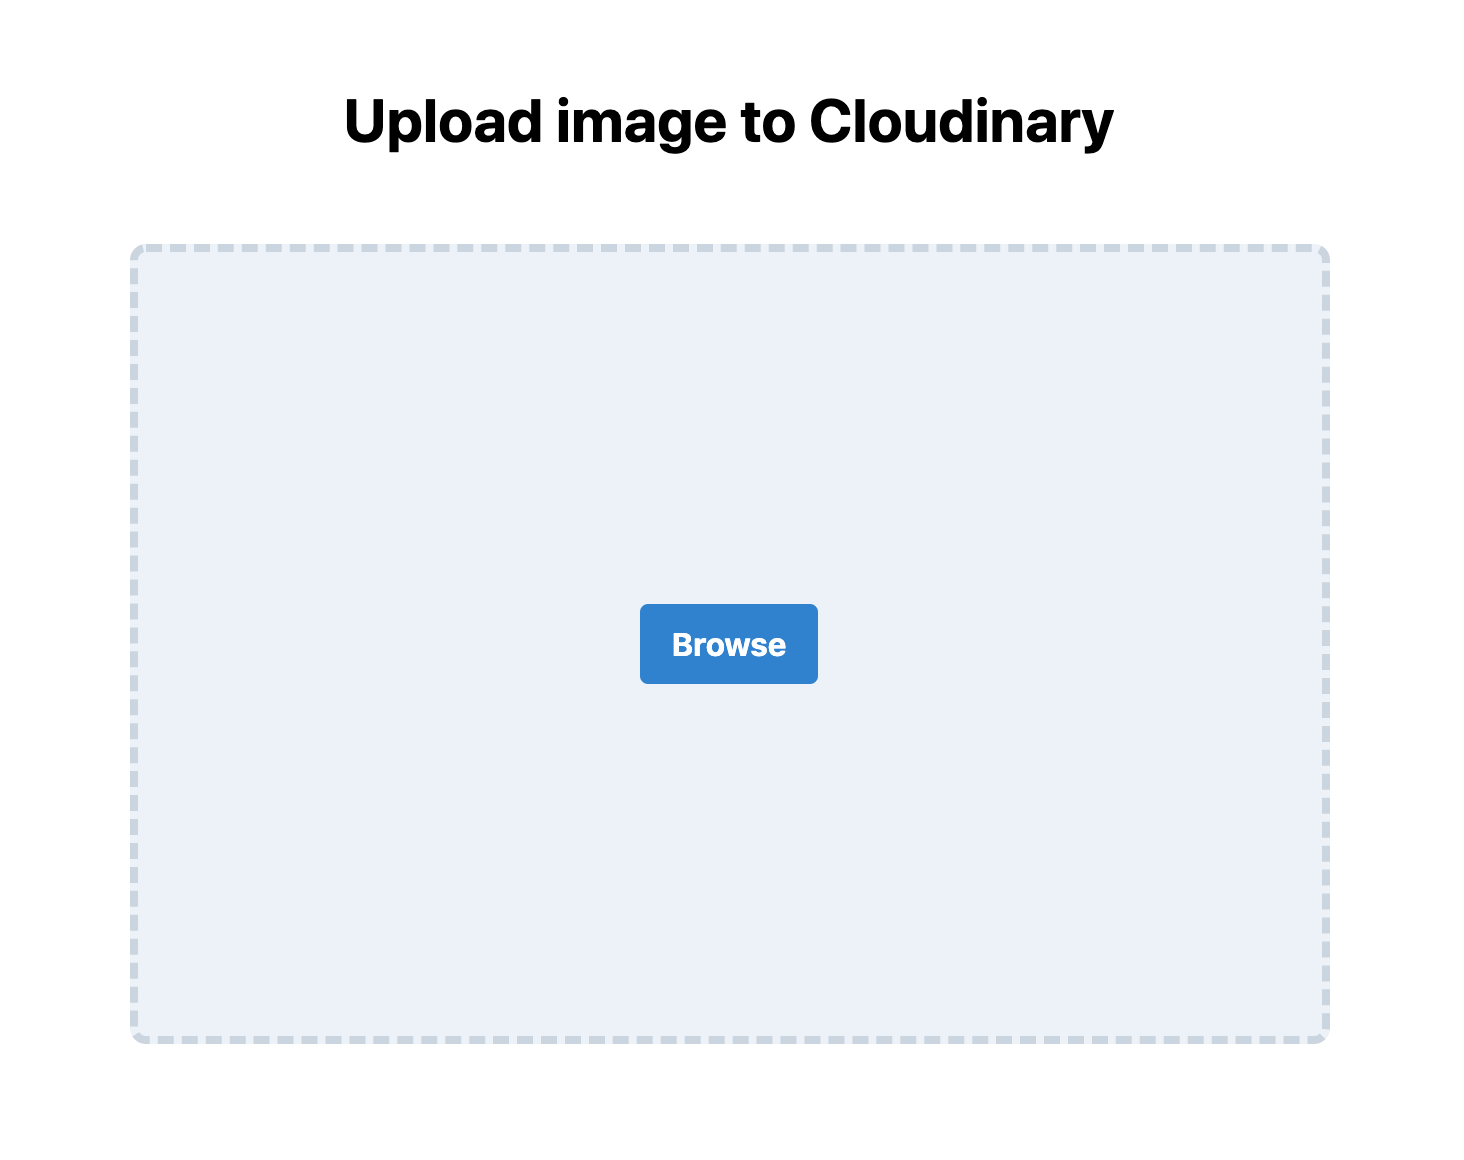 Trigger uploading images with Browse button